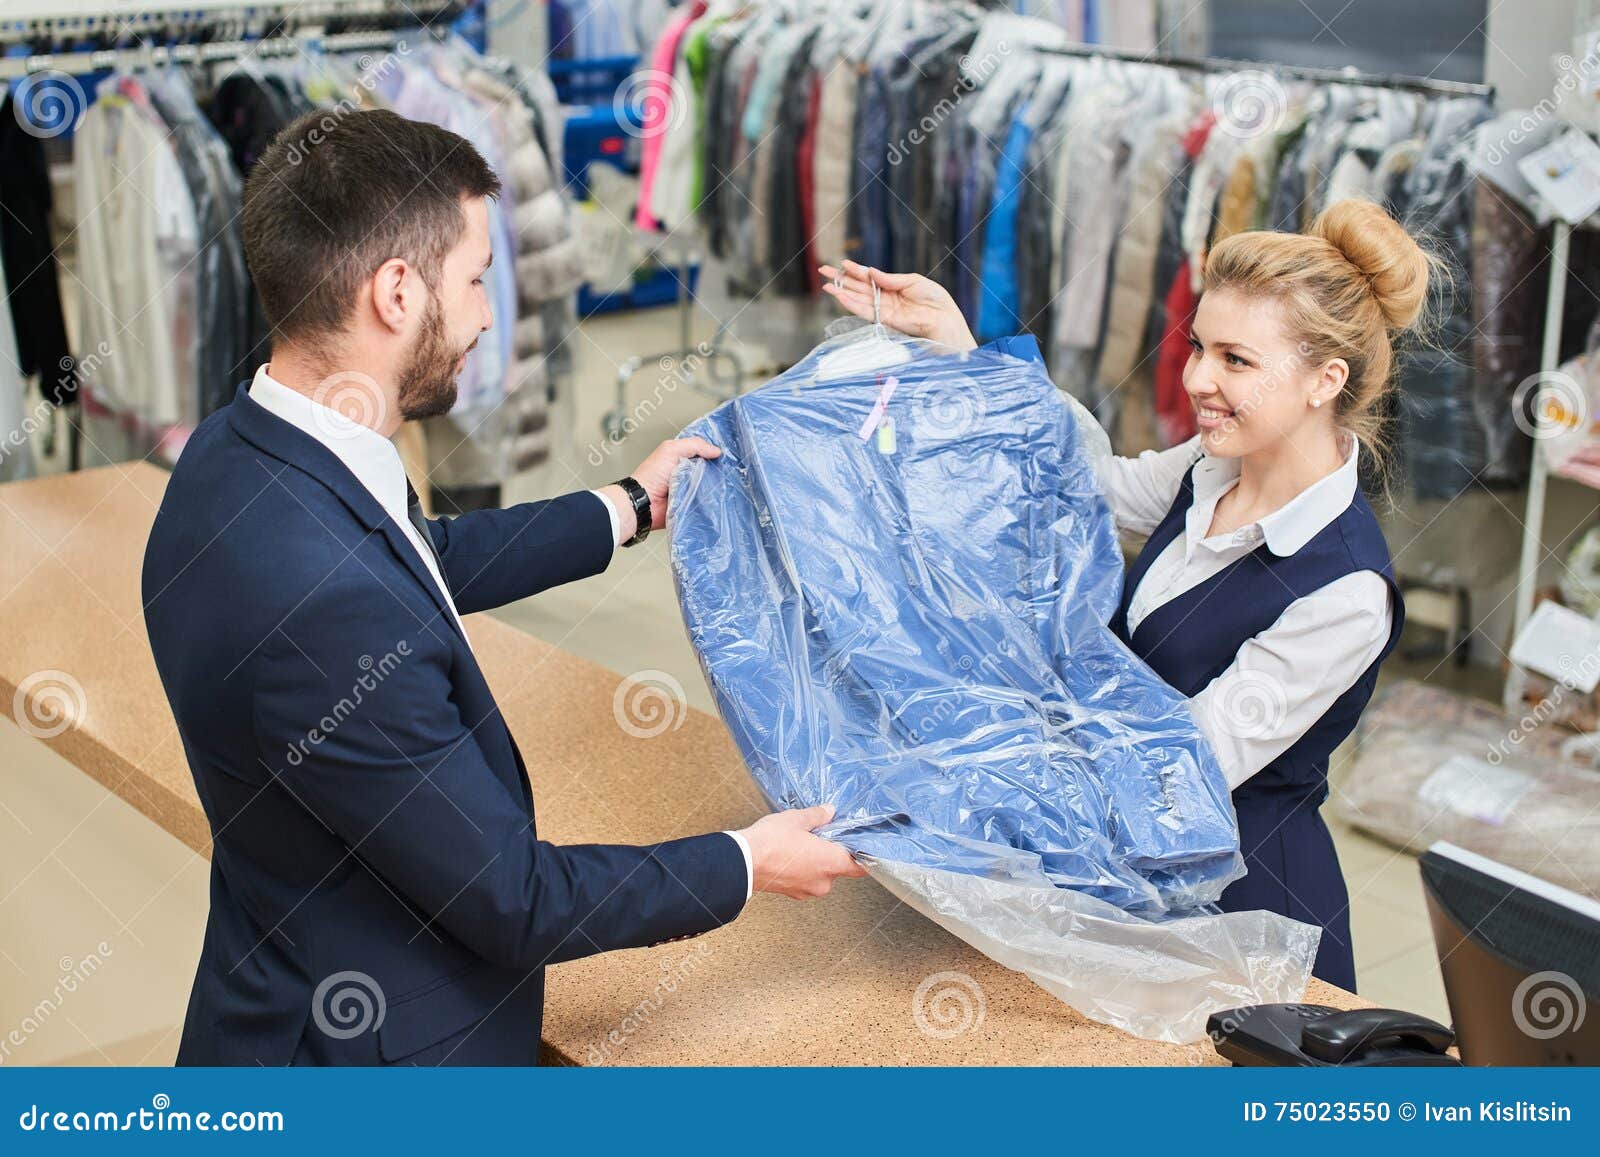 https://thumbs.dreamstime.com/z/girl-worker-laundry-man-gives-client-clean-clothes-men-dry-cleaners-75023550.jpg